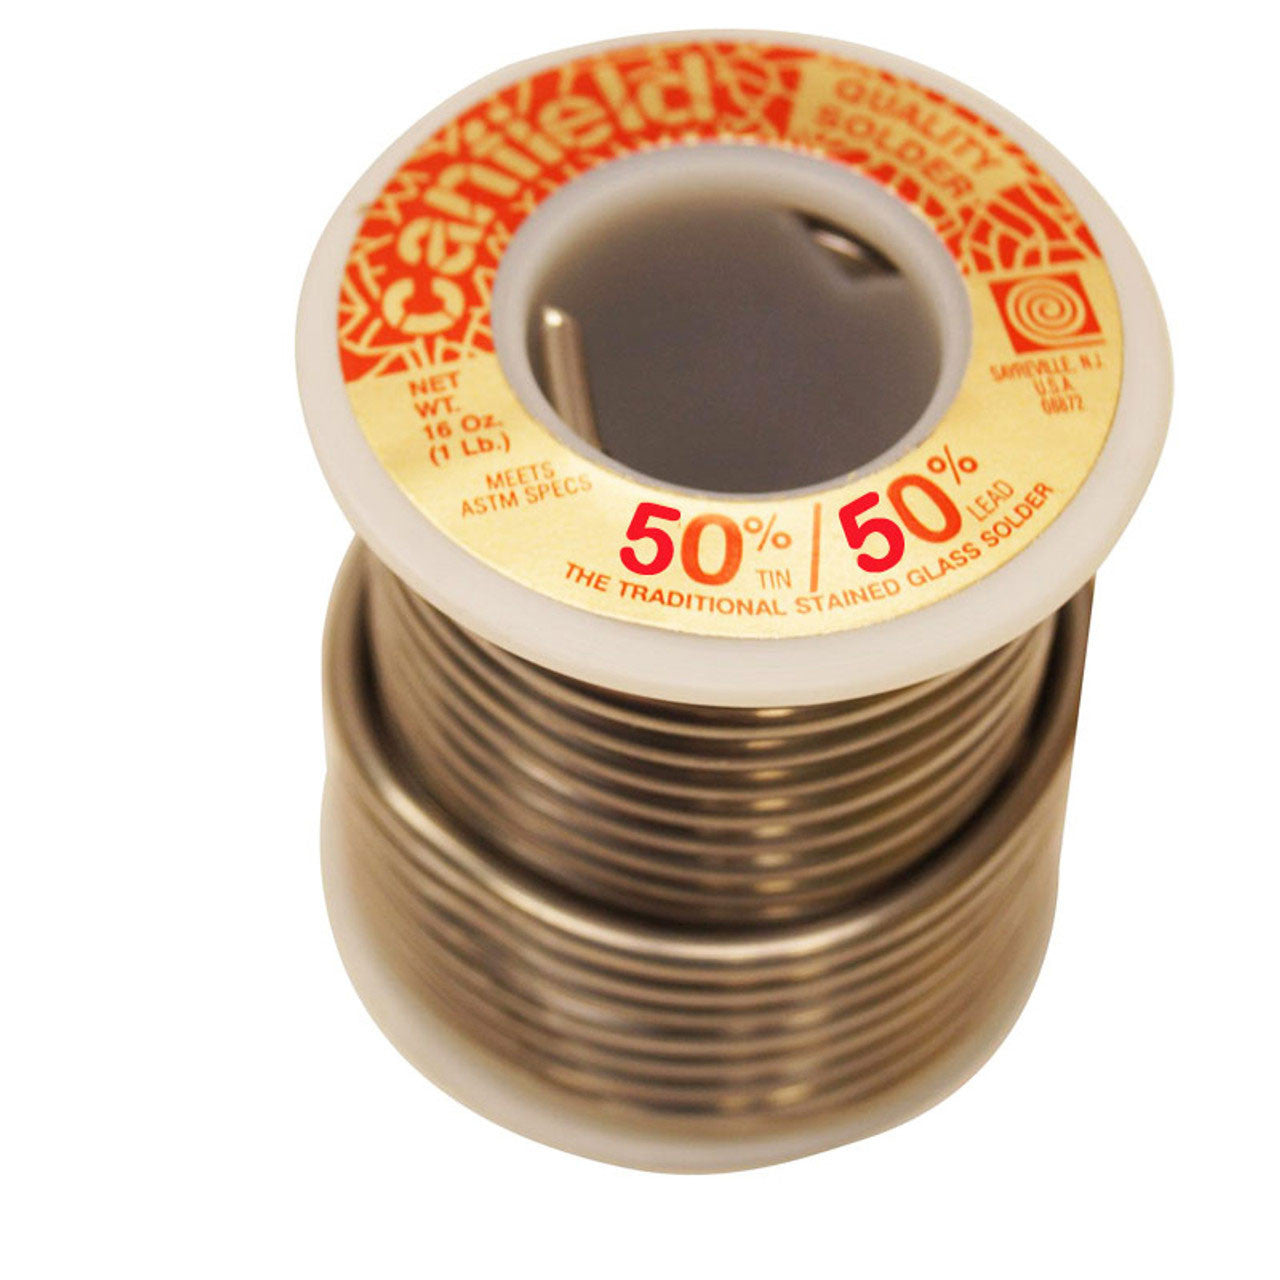  50/50 Lead Solder - 1 pound spool Canfiled (41700-5050)